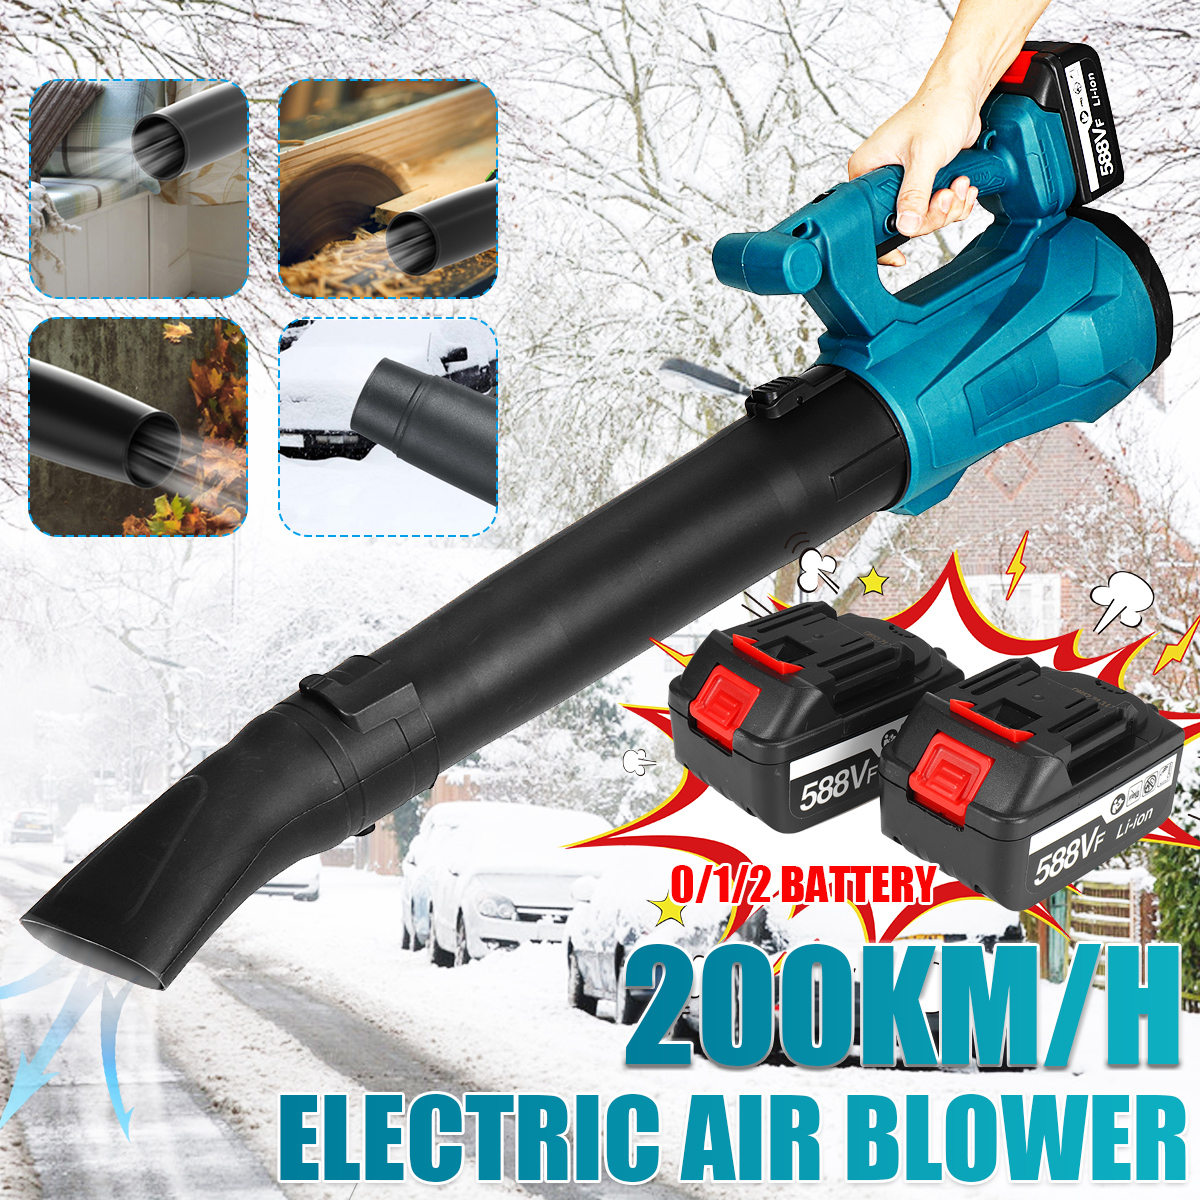 2-in-1-Electric-Air-Blower-Vacuum-Suction-for-Blowing-Dust-Pet-Hair-Snow-Leaves-W-None12-Battery-For-1868168-2